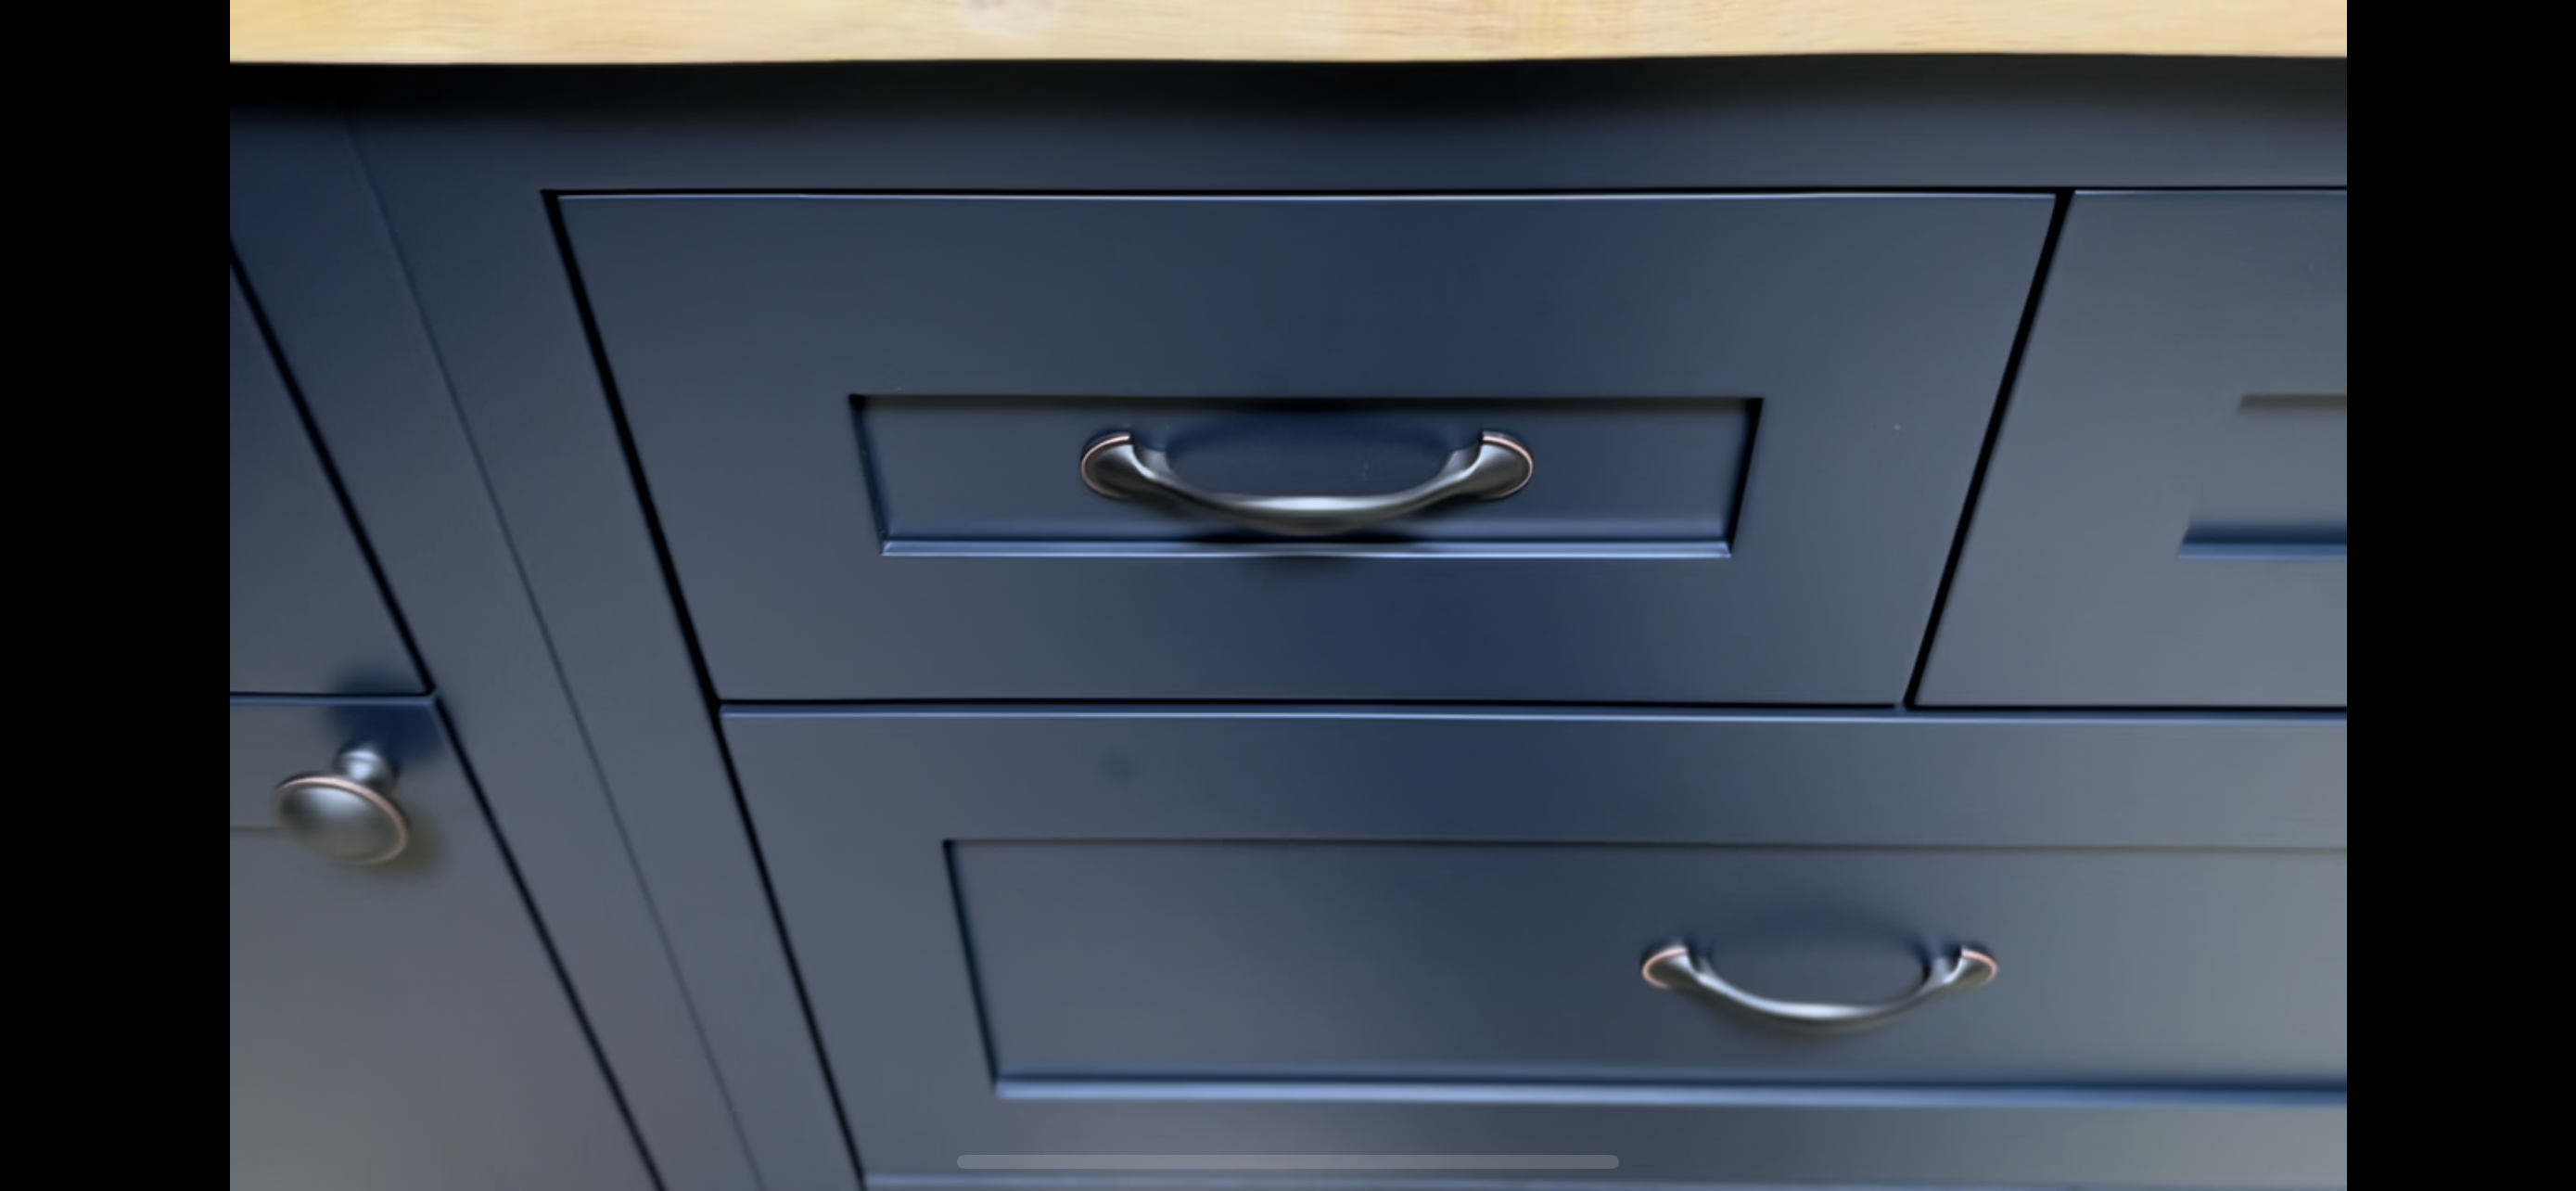 OXARD BLUE INSET CABINETS